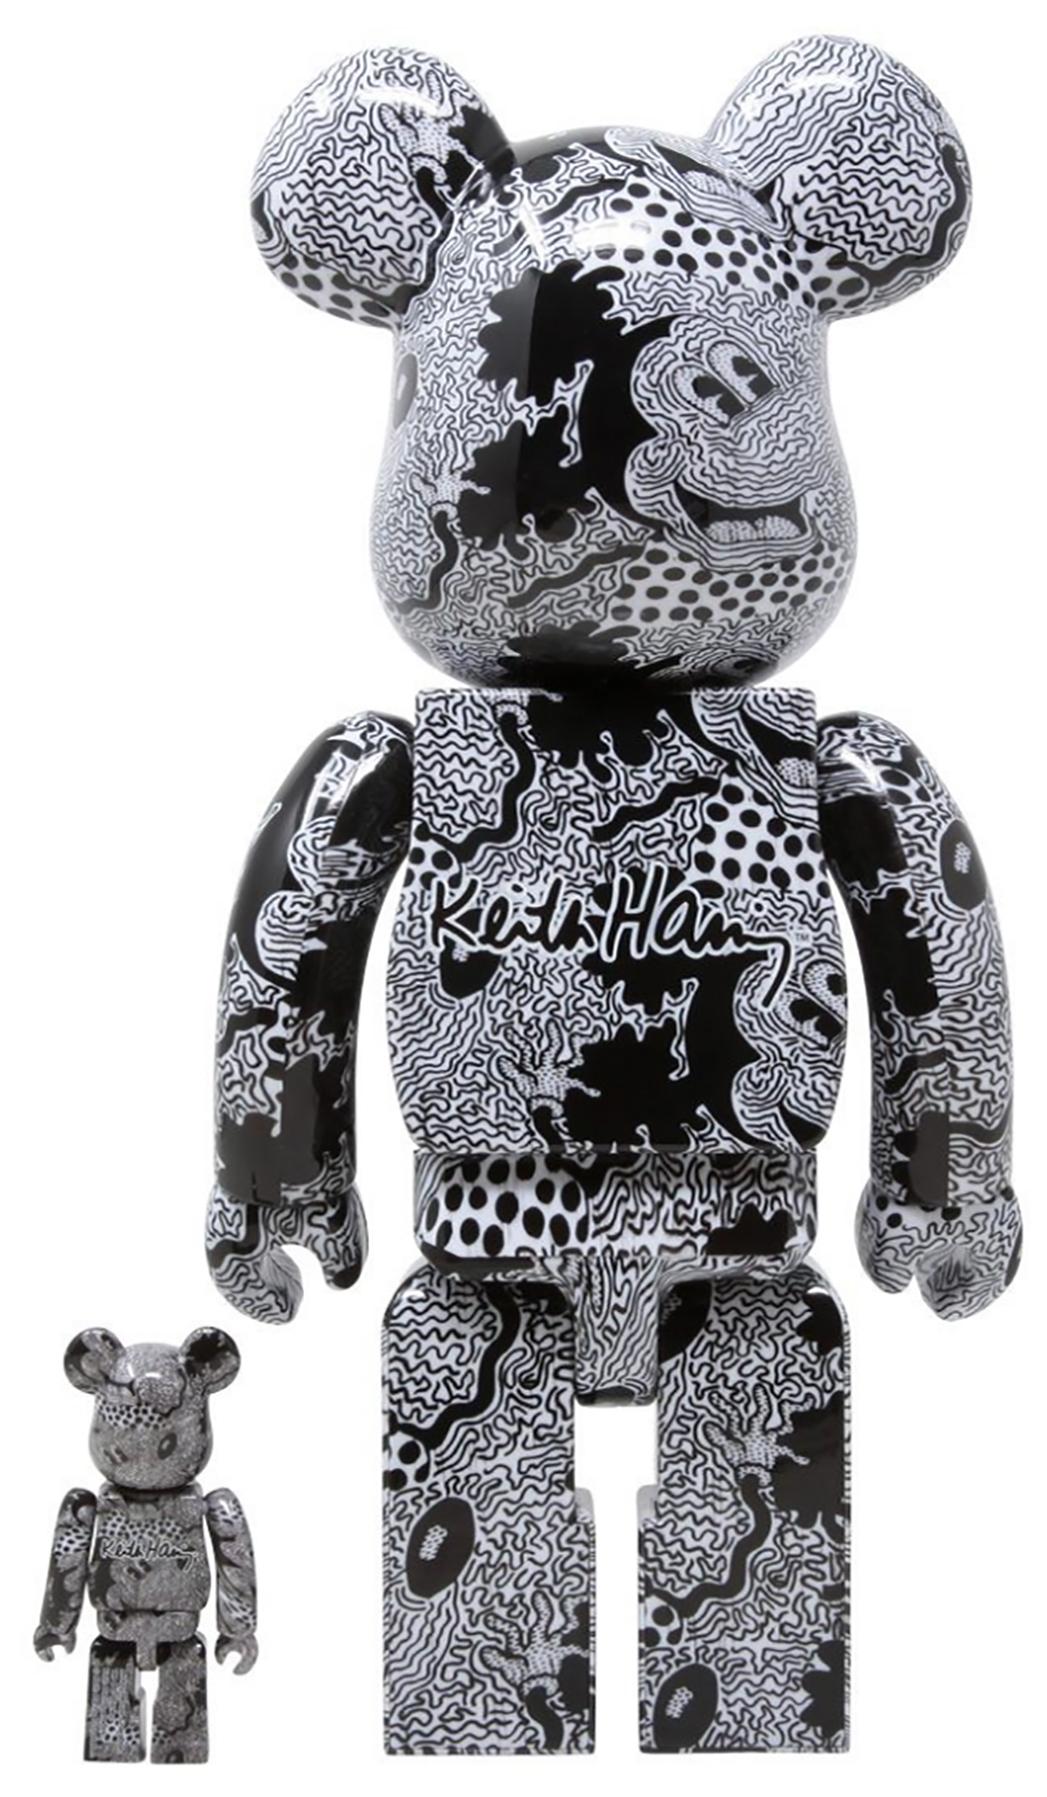 Keith Haring Bearbrick 400% Begleiter (Haring Mickey Mouse BE@RBRICK) (Streetart), Print, von (after) Keith Haring